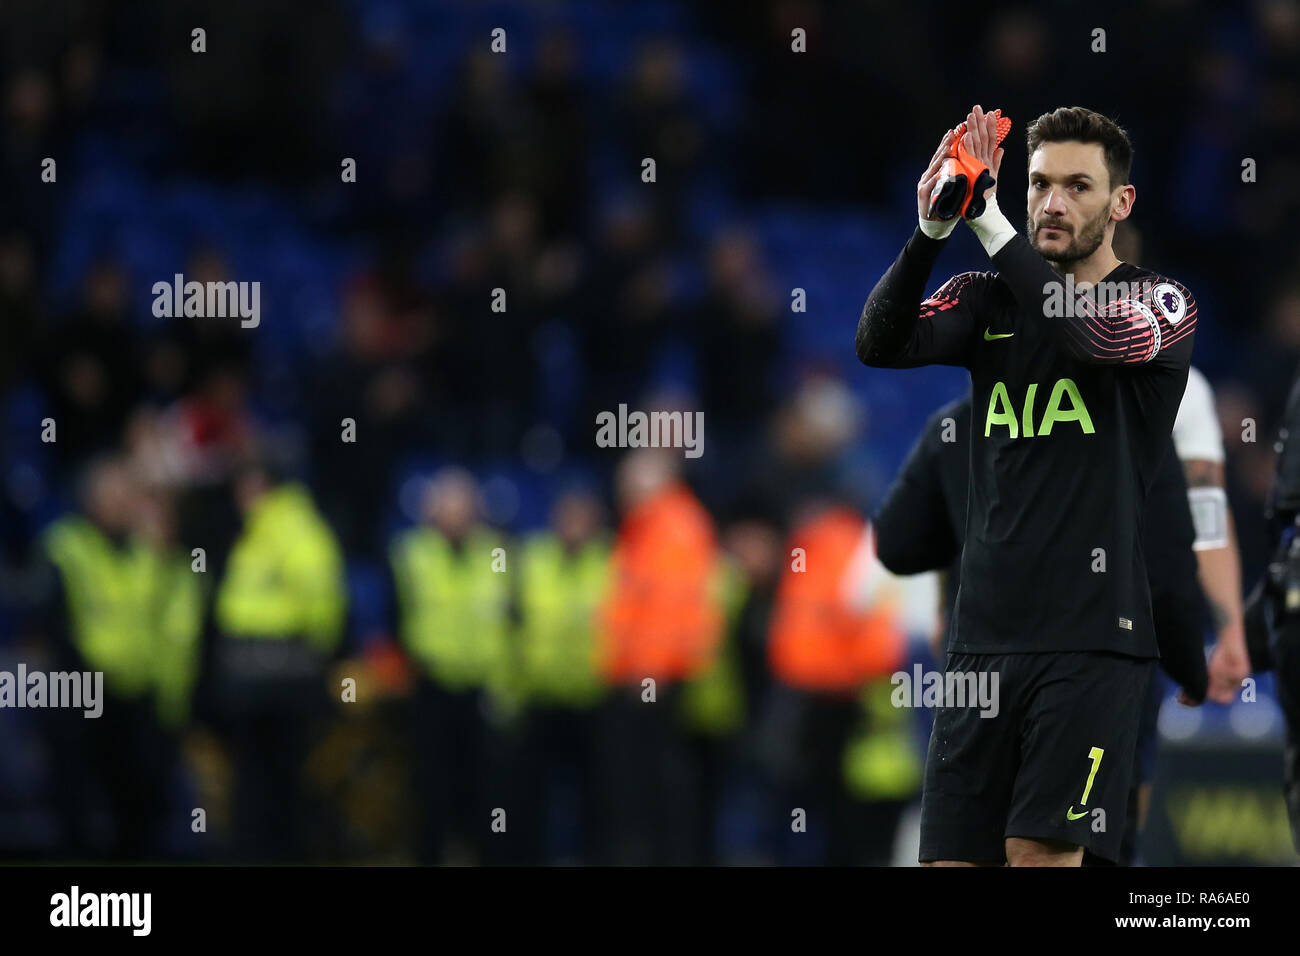 Cardiff, UK. 01st Jan, 2019. Hugo Lloris, the goalkeeper of Tottenham  Hotspur applauds the Spurs fans at end of the game. Premier League match, Cardiff  City v Tottenham Hotspur at the Cardiff